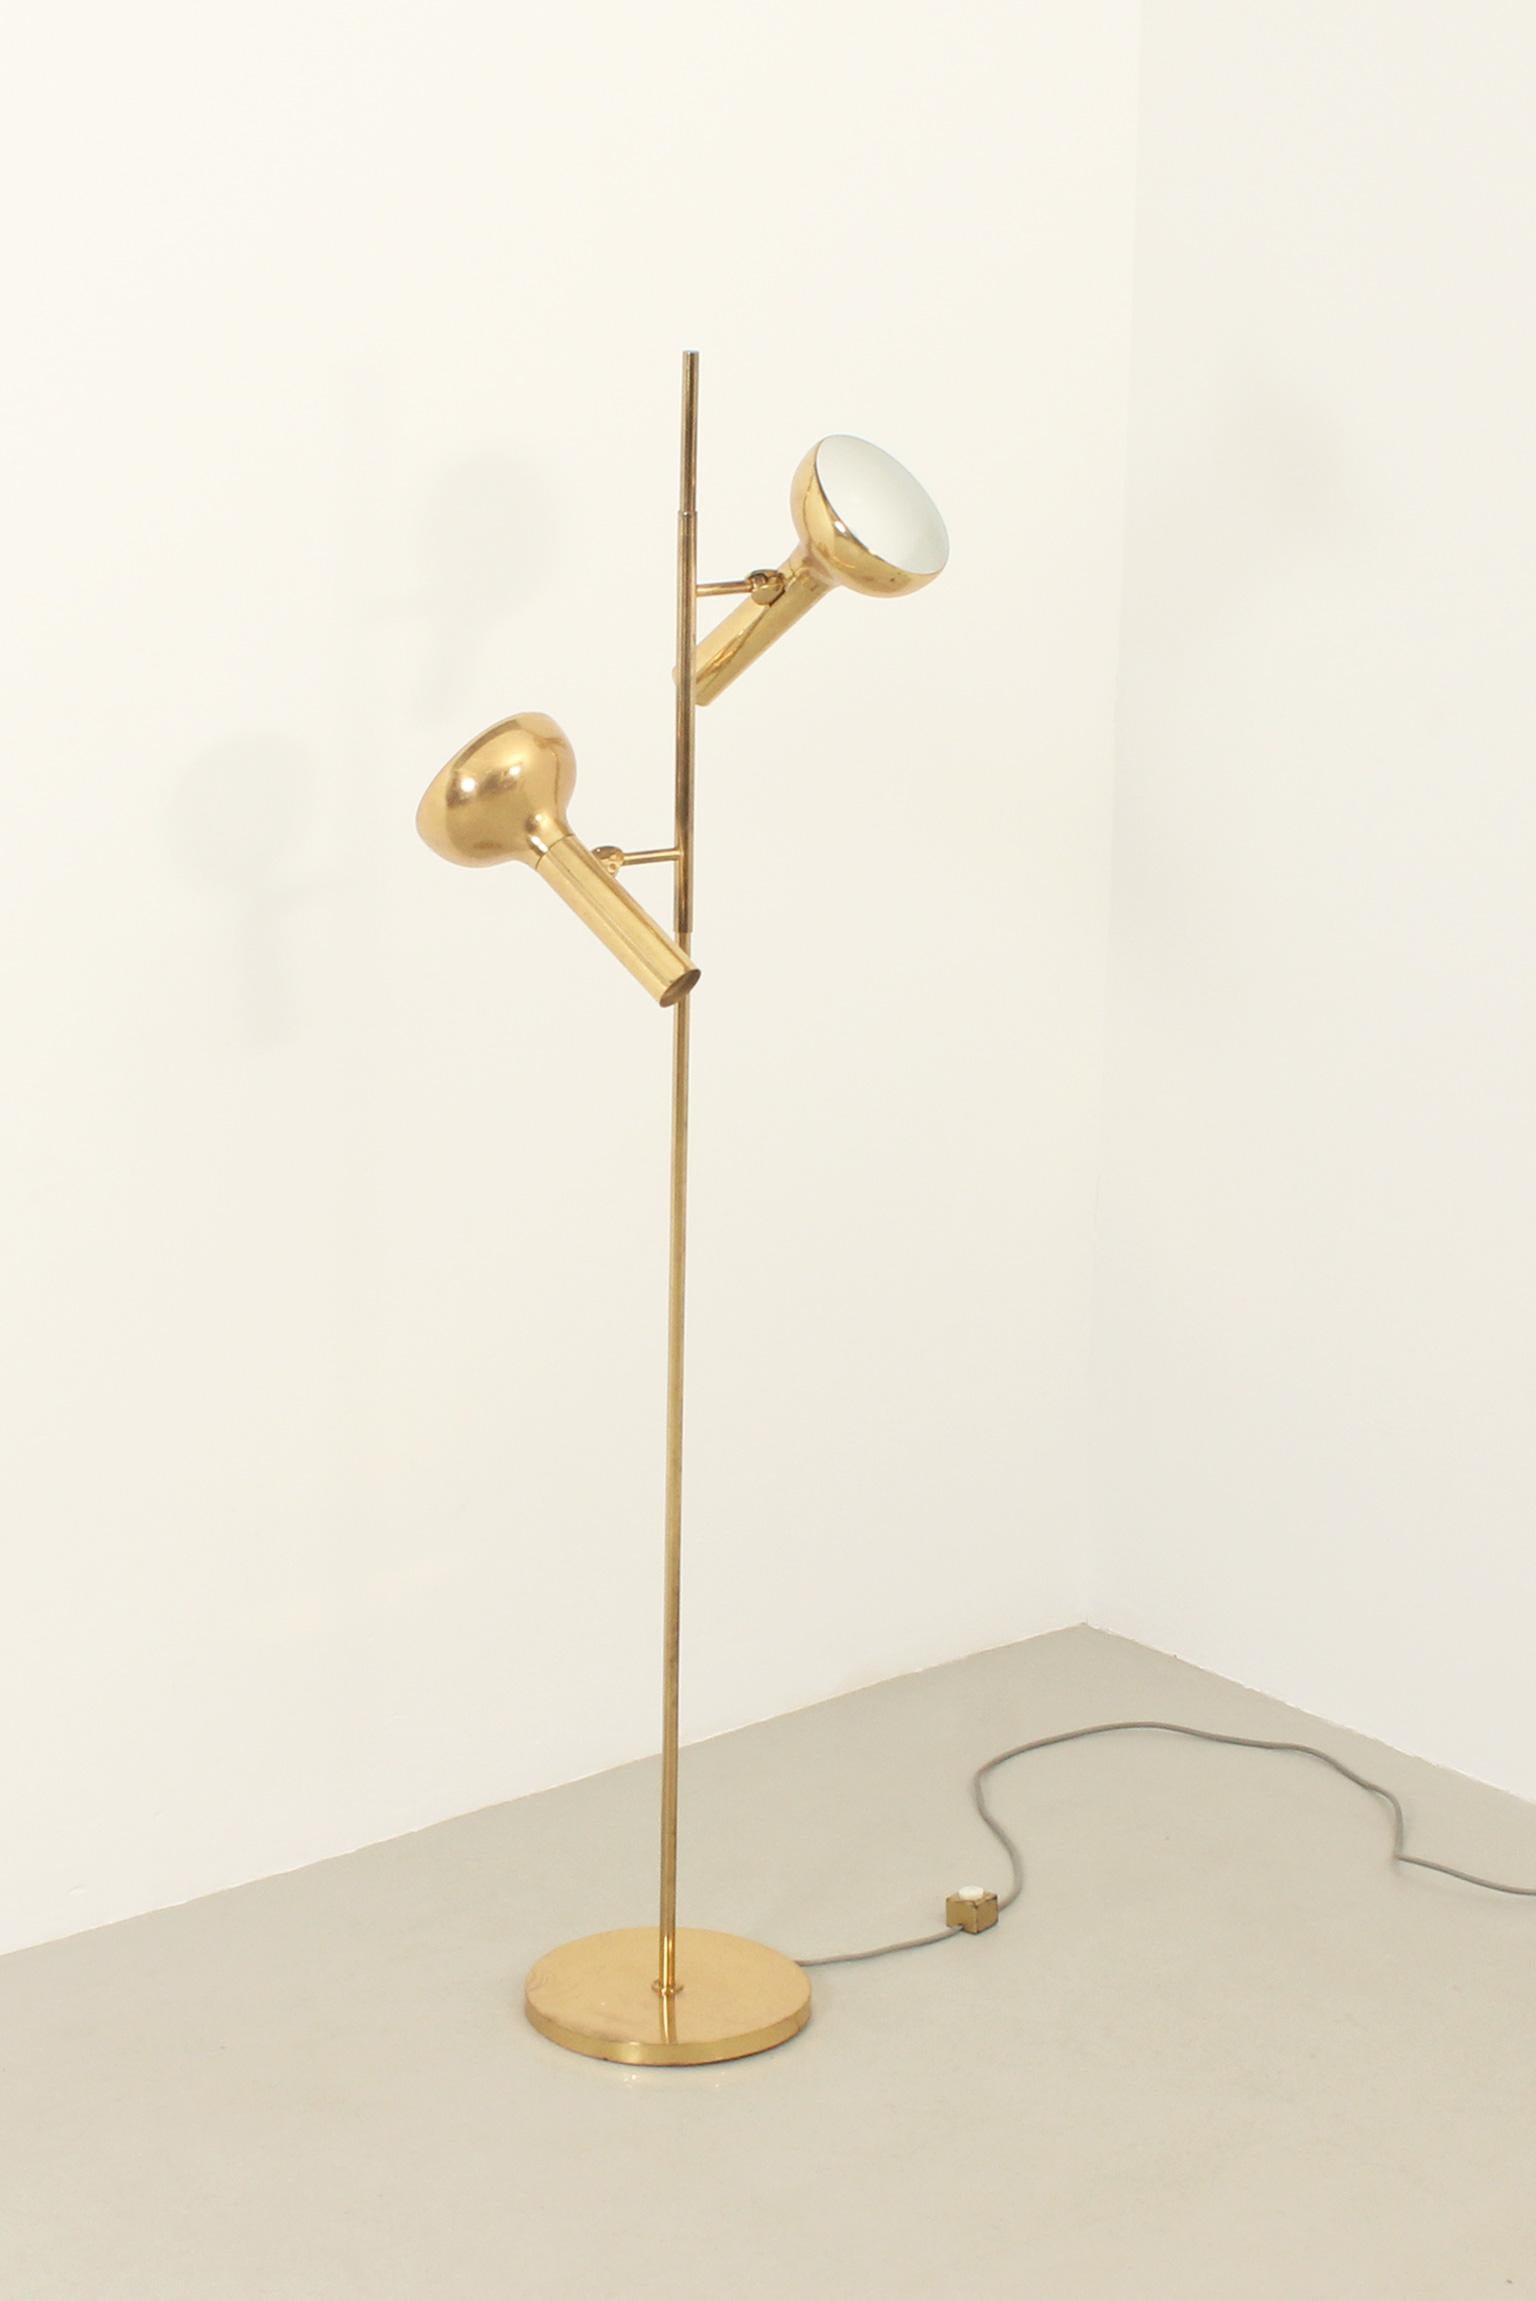 Brass floor lamp with two adjustable light points produced by Hustadt Leuchten, Germany, 1970's. Possibility of turning on one or both lights.